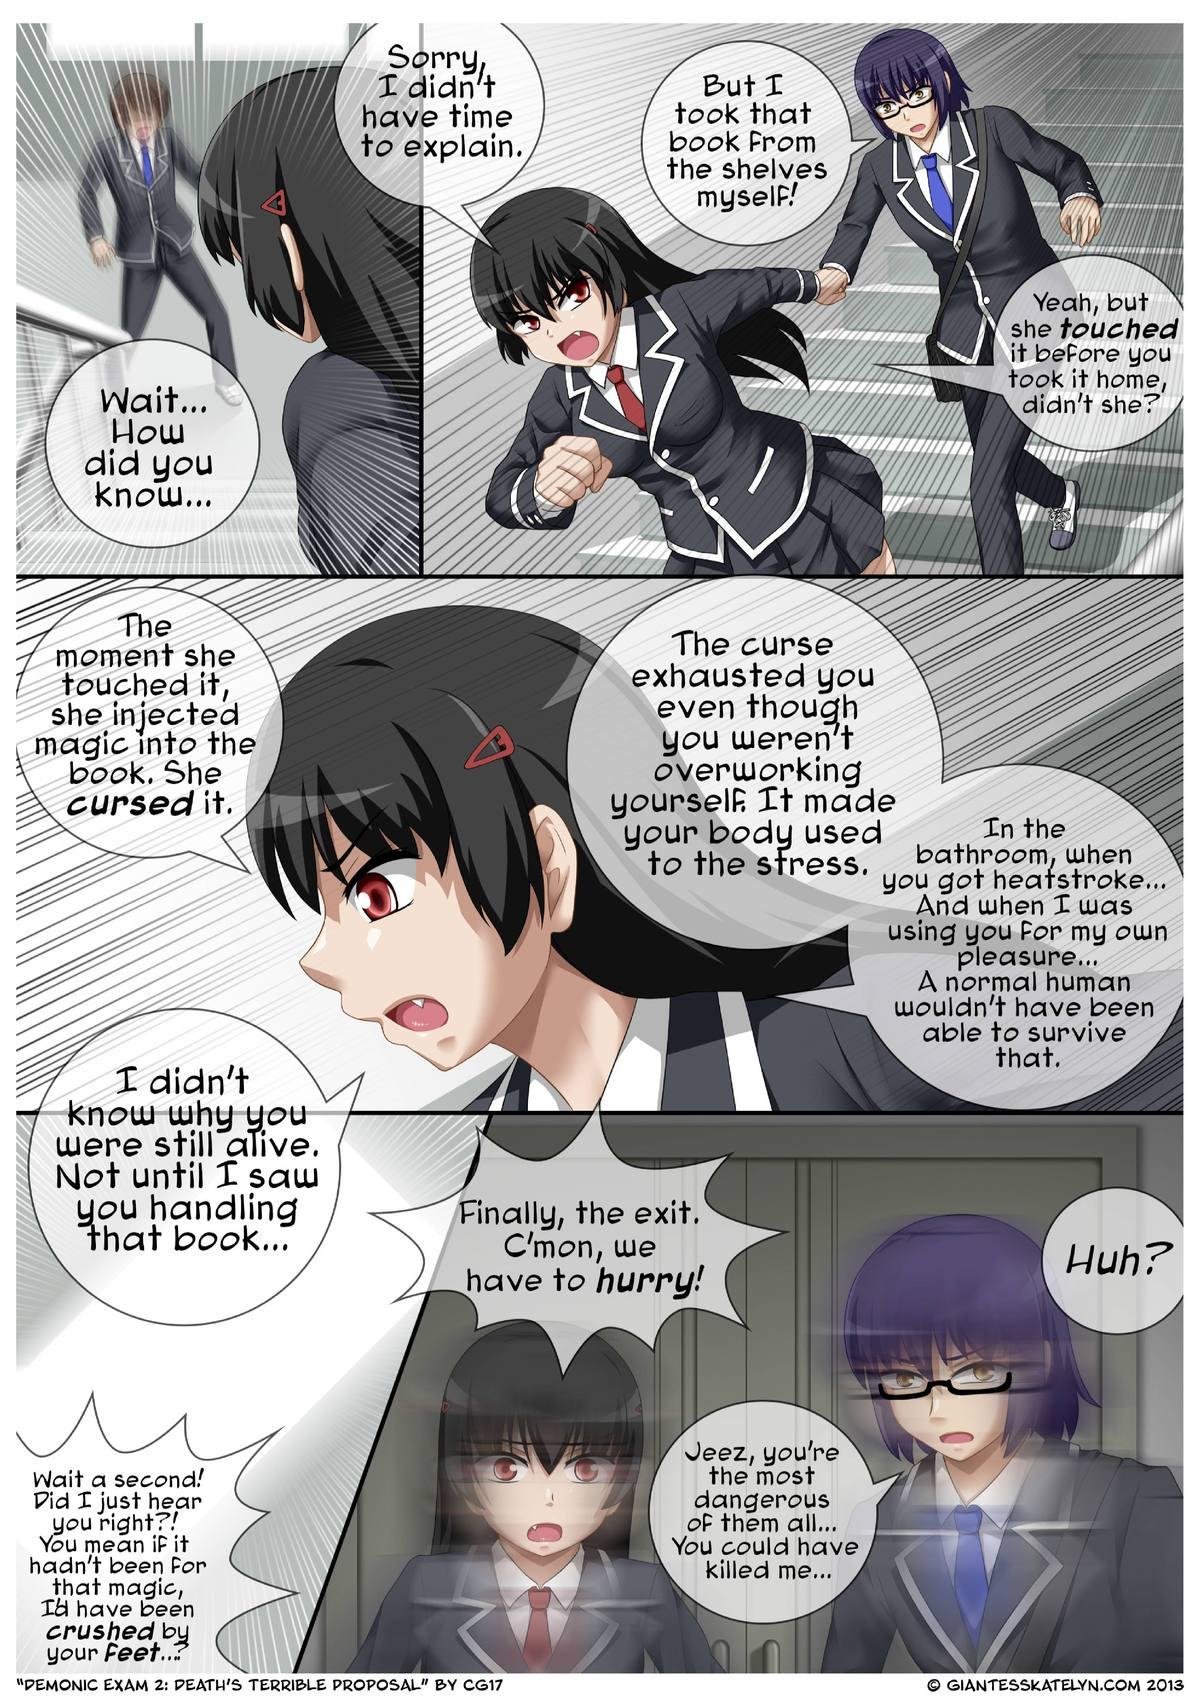 Lovers Demonic exam 2 Death's Terrible Proposal Butts - Page 10